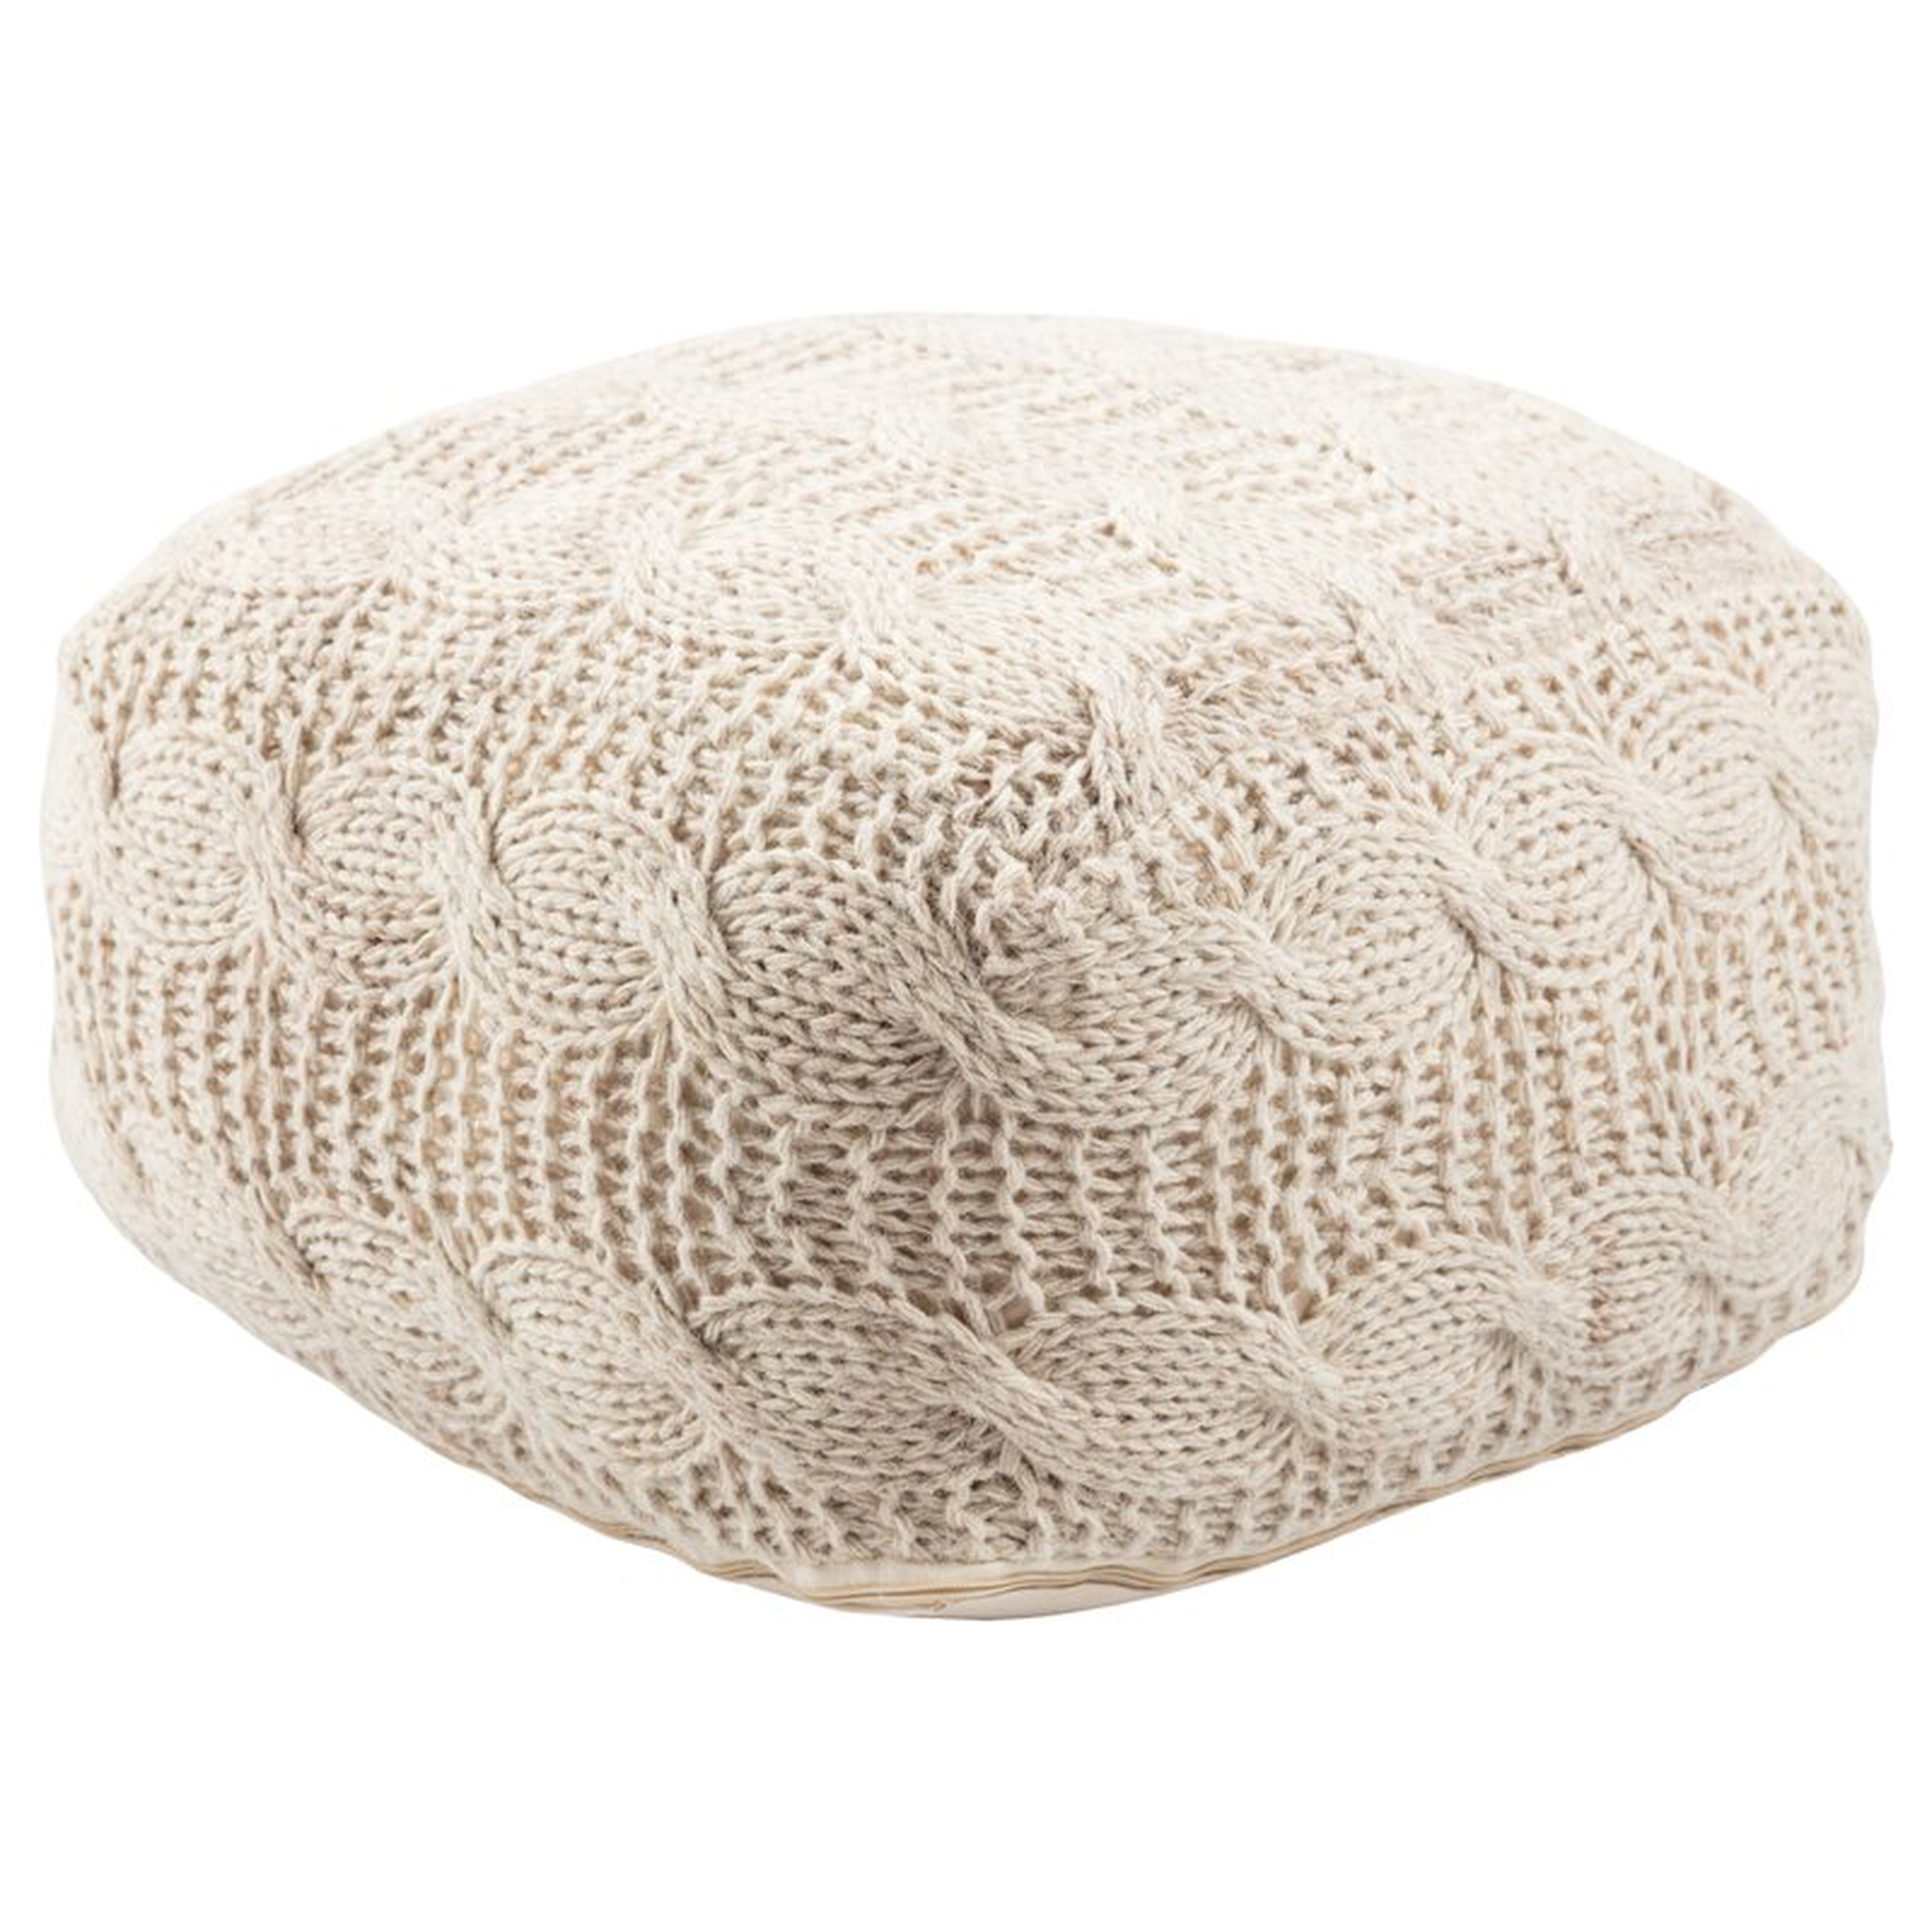 Milford Solid Wool Pouf Ottoman Upholstery Color: Cream - Perigold